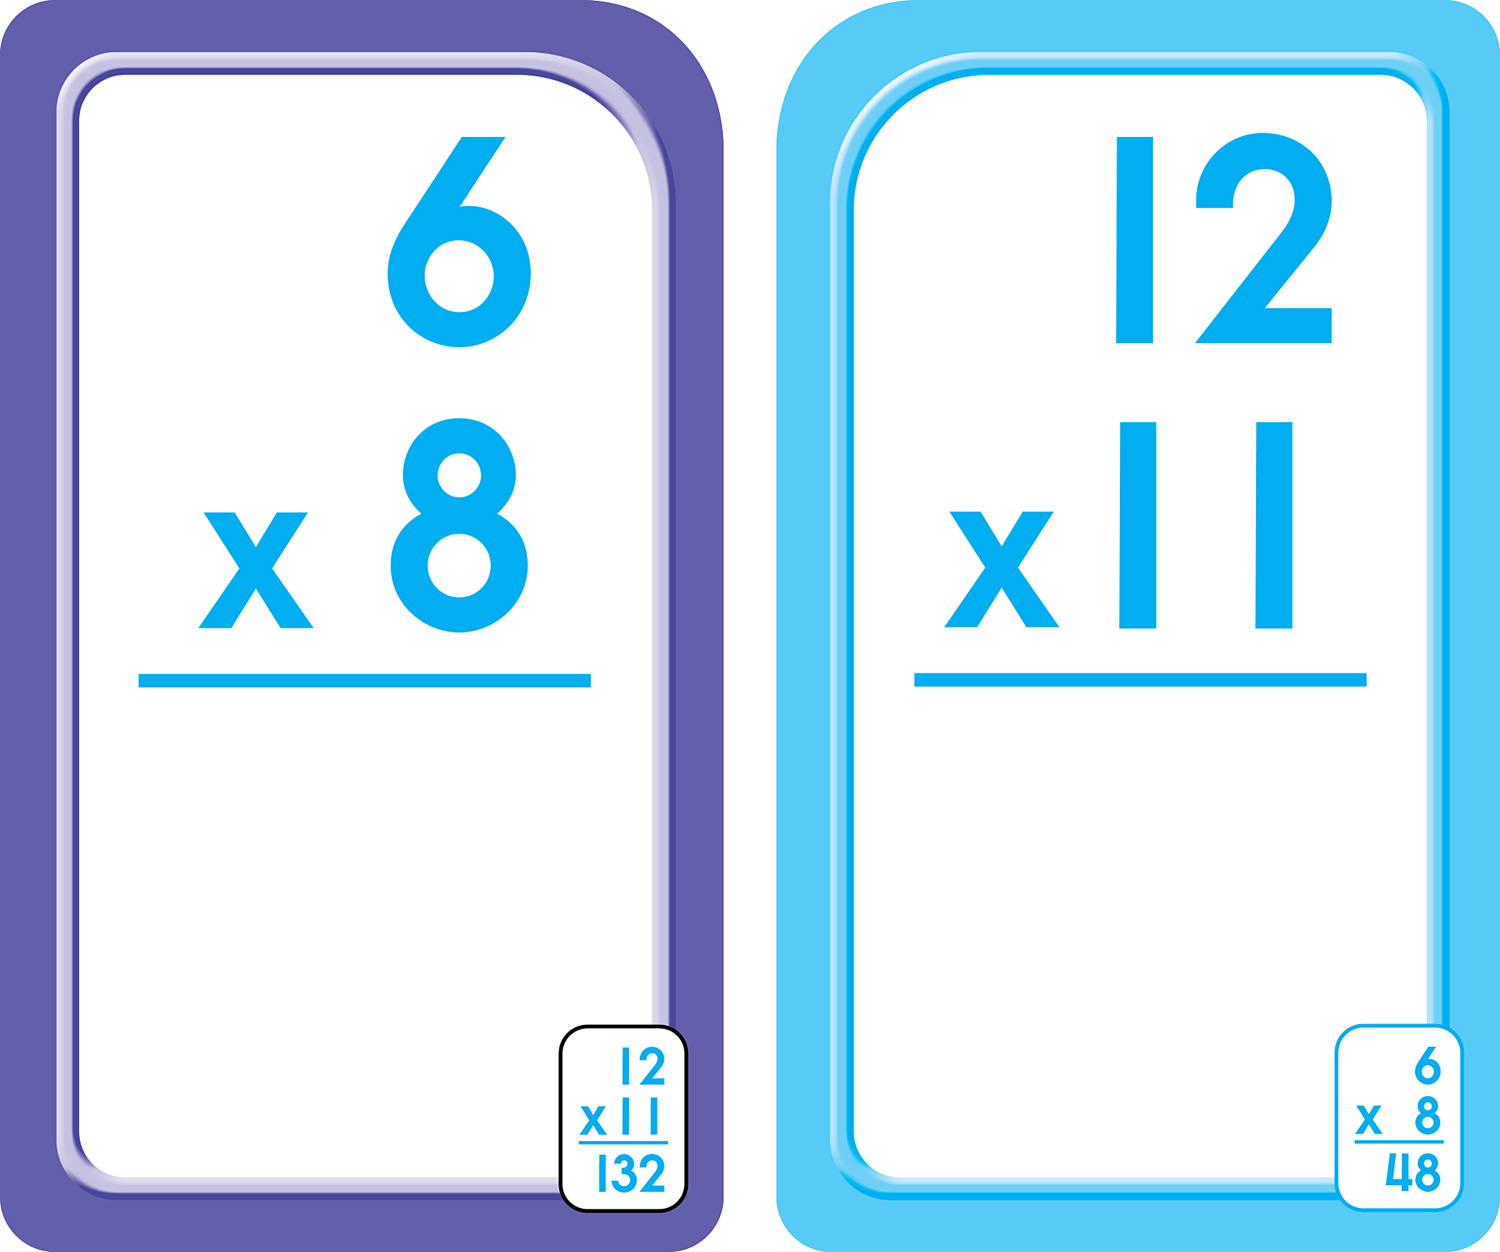 Multiplication Flash Cards Printable With Answers